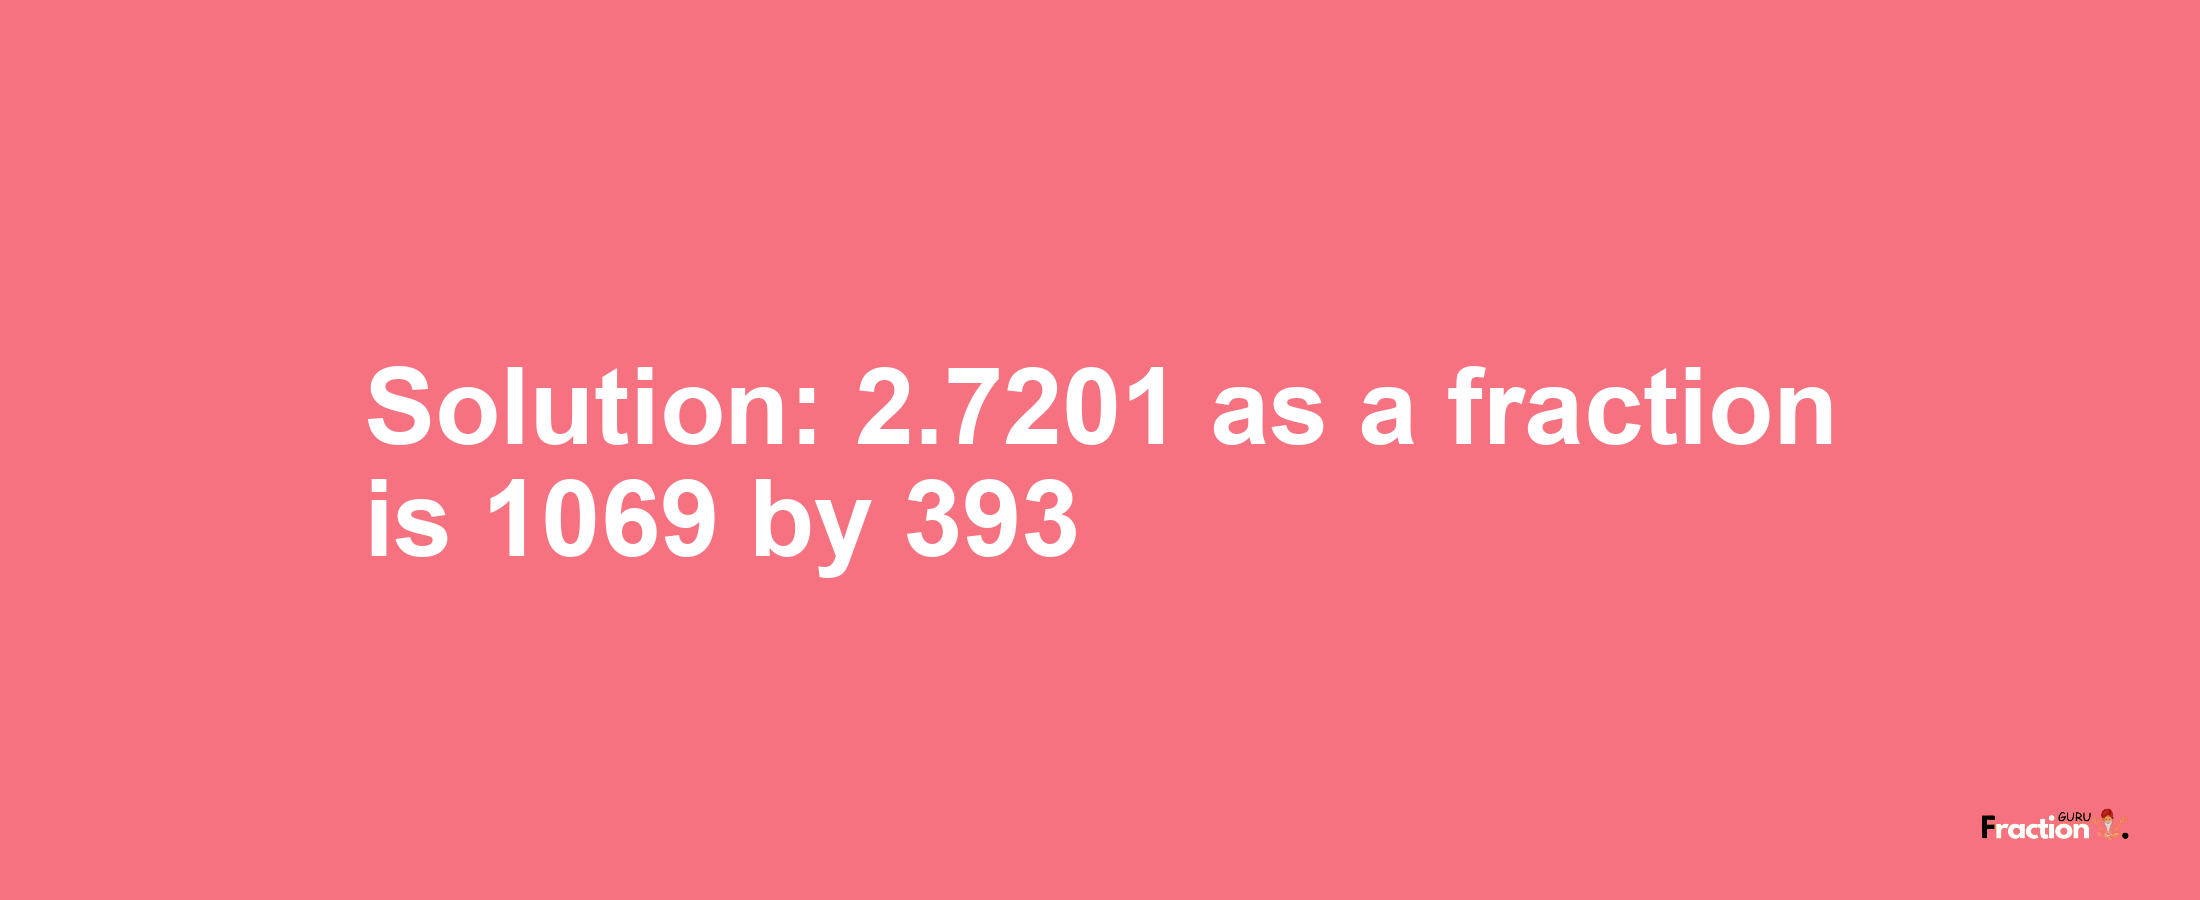 Solution:2.7201 as a fraction is 1069/393